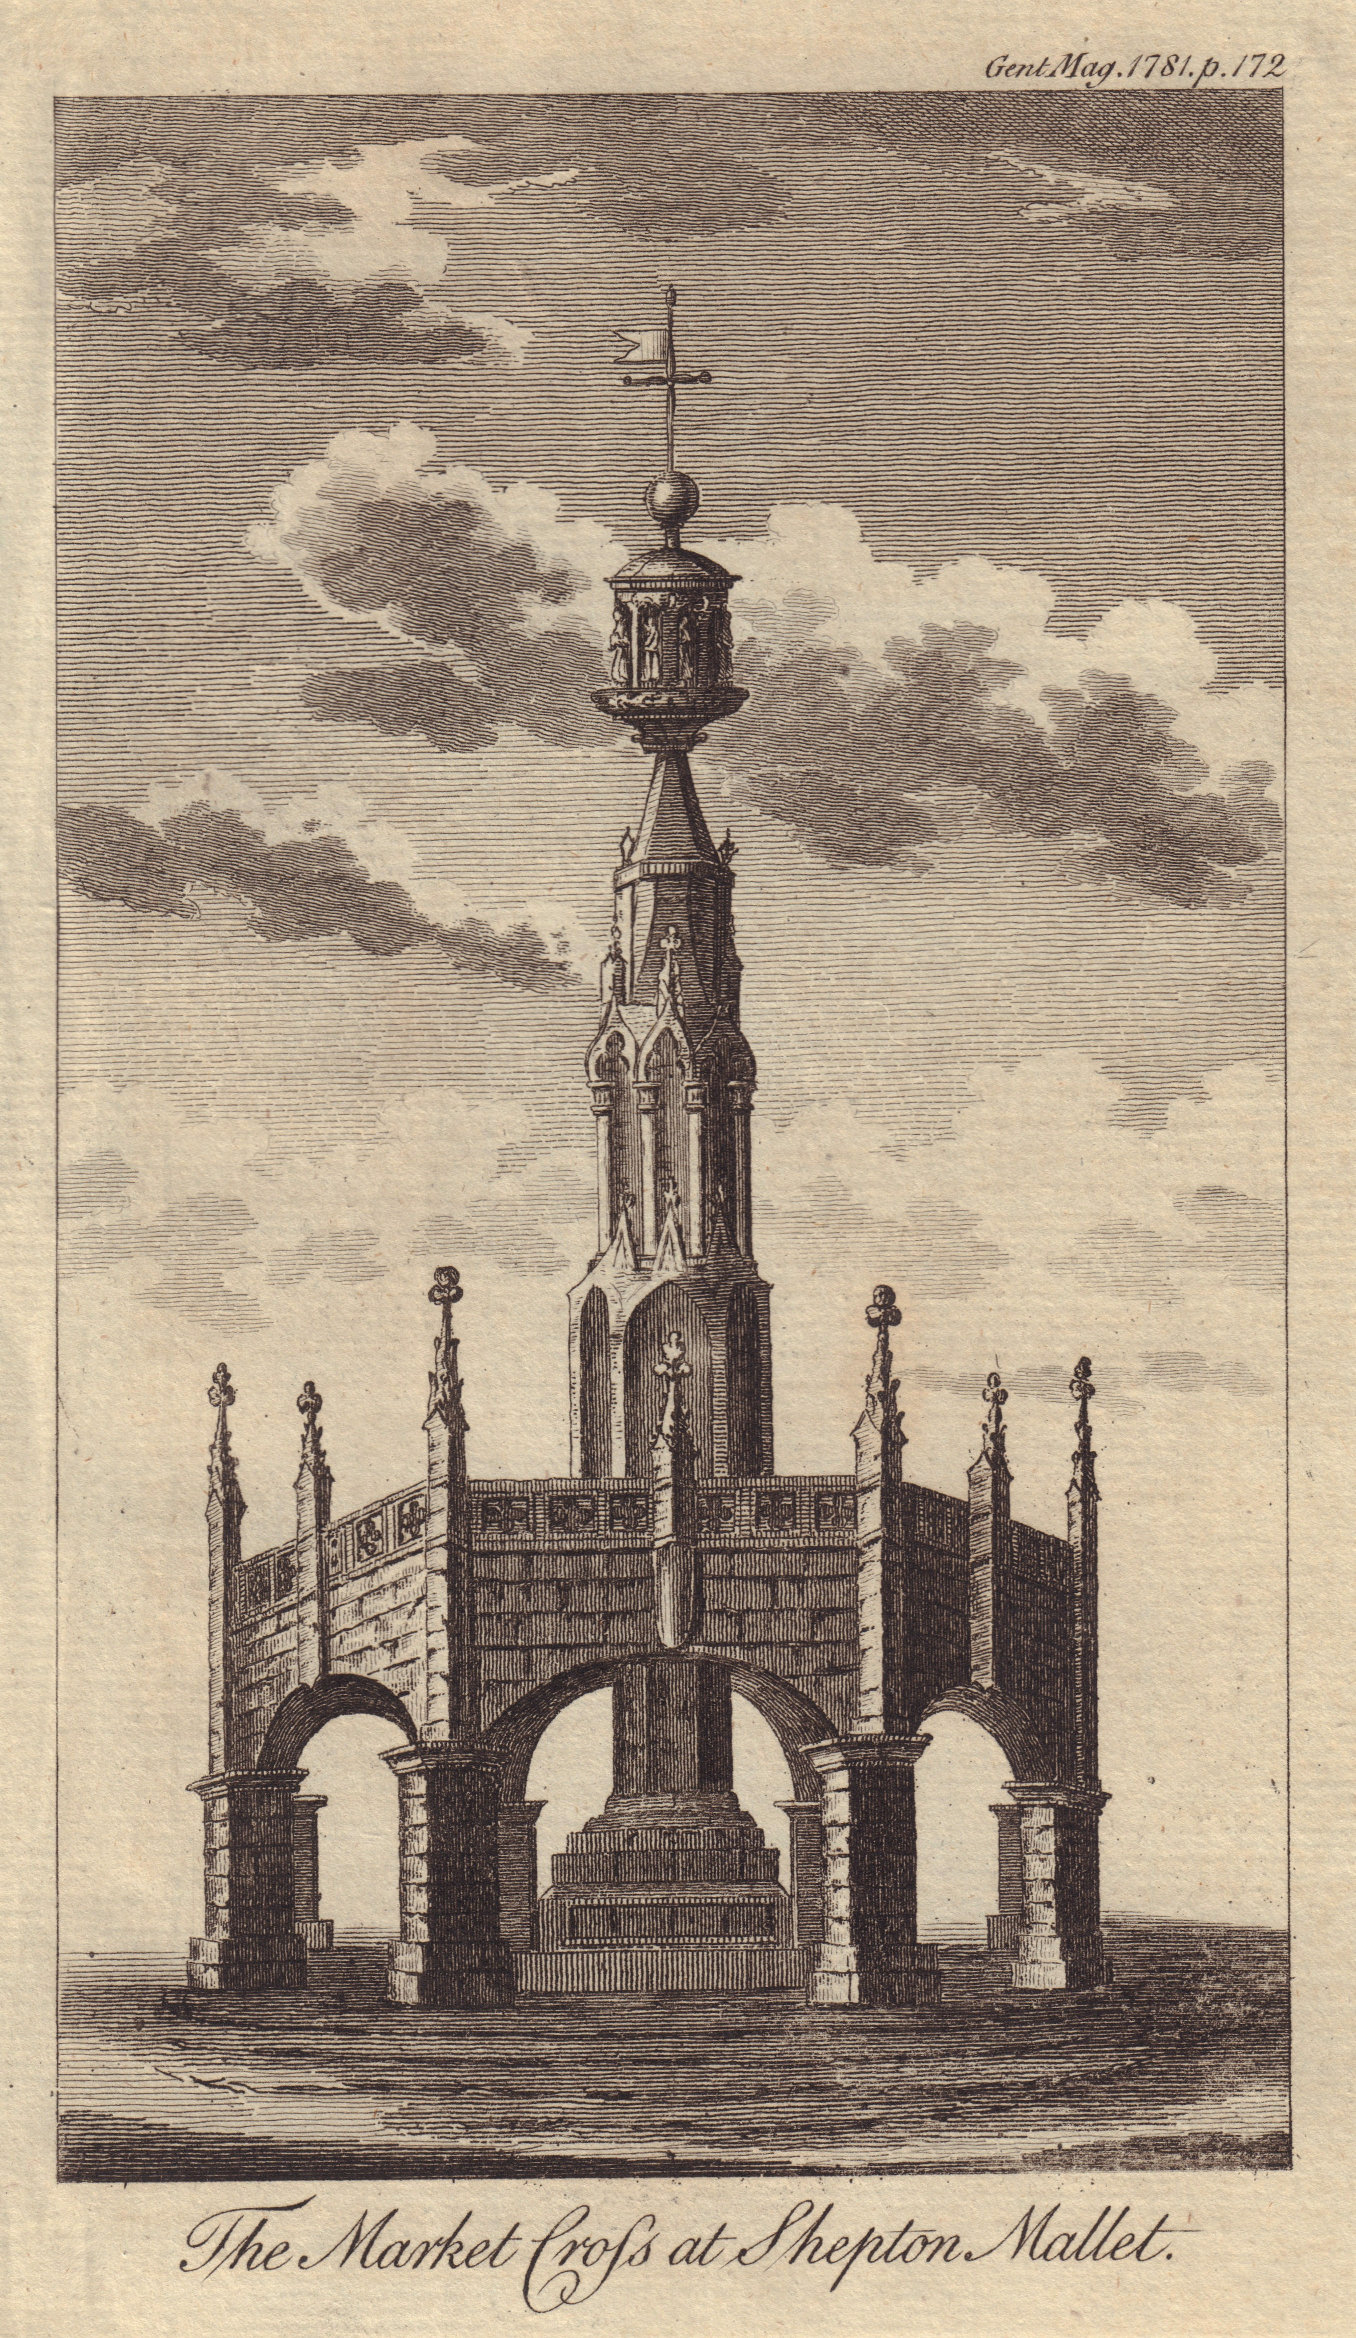 Associate Product The Market Cross at Shepton Mallet, Somerset. GENTS MAG 1781 old antique print